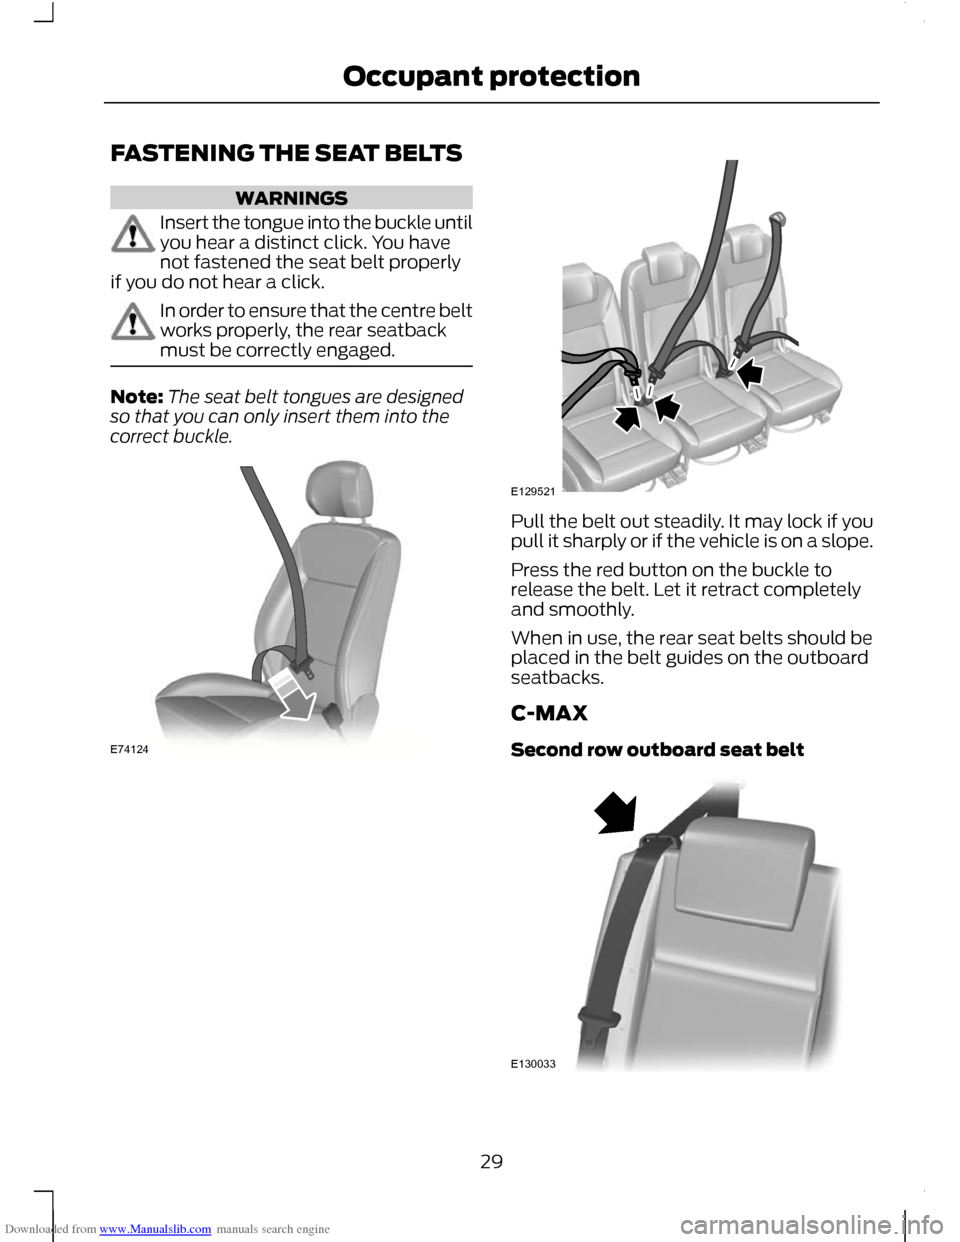 FORD C MAX 2011 2.G Owners Manual Downloaded from www.Manualslib.com manuals search engine FASTENING THE SEAT BELTS
WARNINGS
Insert the tongue into the buckle until
you hear a distinct click. You have
not fastened the seat belt proper